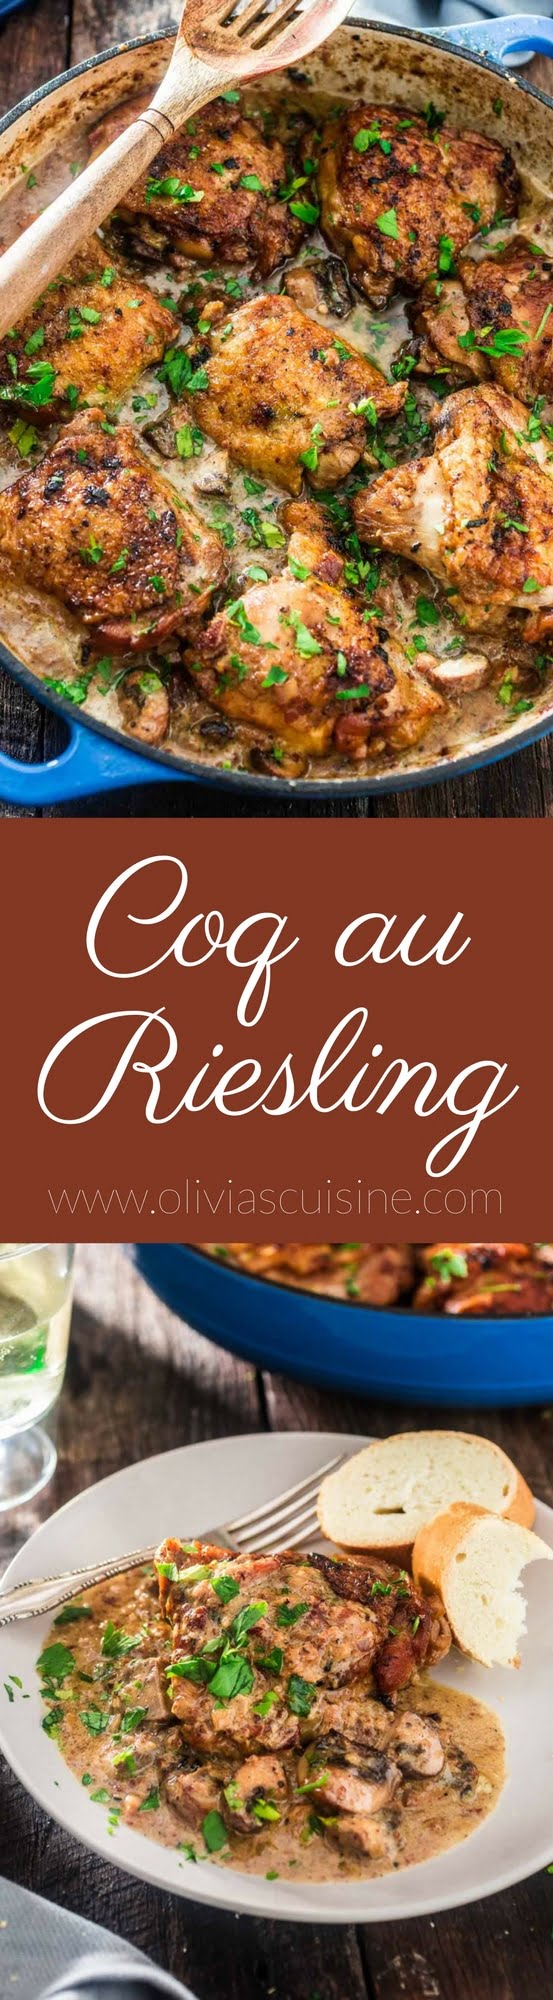 Coq au Riesling (Chicken Thighs Braised in White Wine) | www.oliviascuisine.com | A creamy twist on the classic Coq au Vin. Chicken thighs, bacon and mushrooms are braised in an off-dry Riesling and heavy cream is added at the end to make it even more delicious! Oh, and it's all made in one pot! (Sponsored by @theseekerwines)